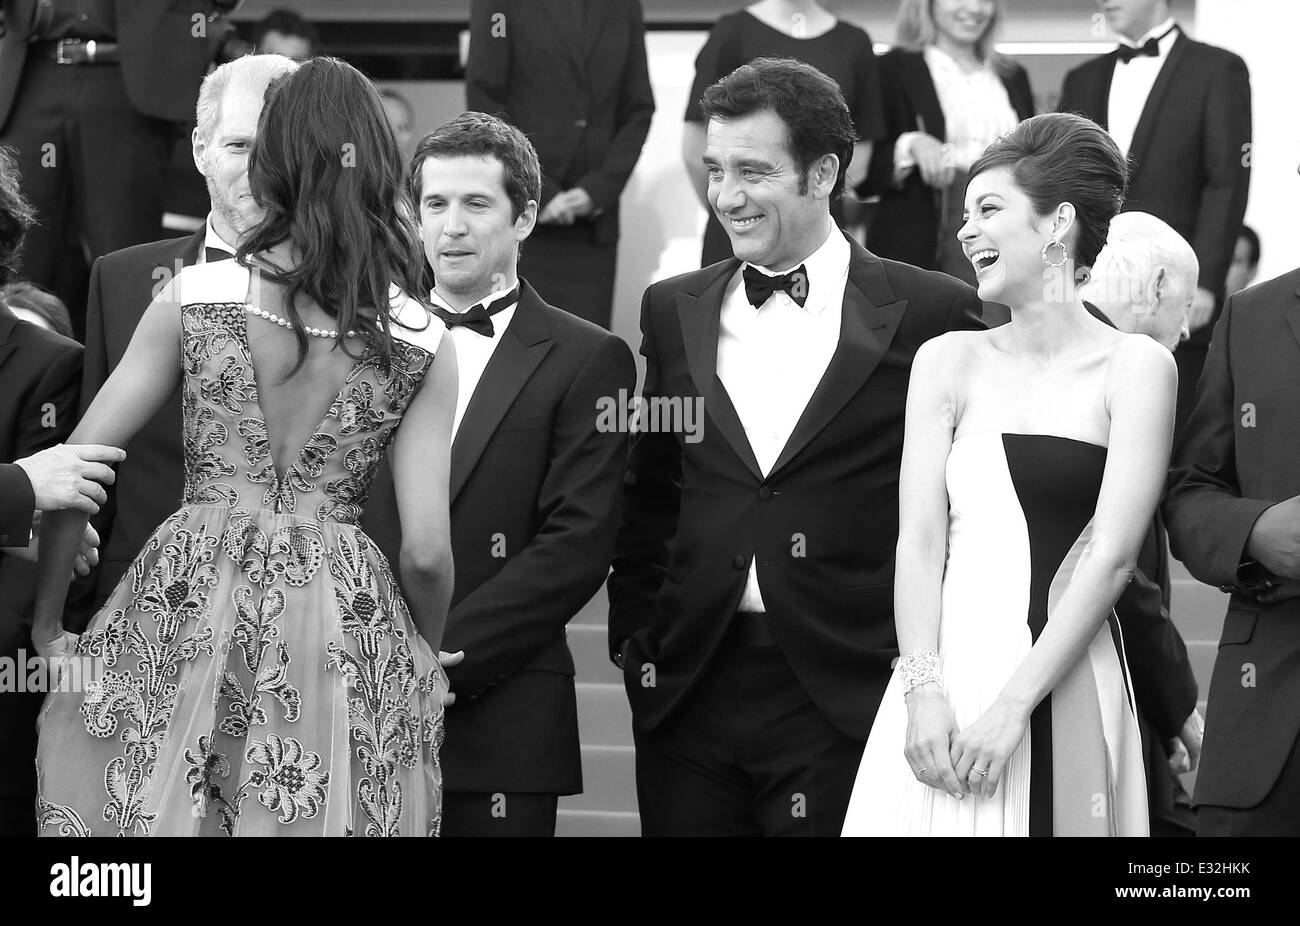 66th Cannes Film Festival - Blood Ties - premiere  Featuring: Marion Cotillard,Zoe Saldana Where: Cannes, France When: 20 May 2013 Toby/WENN.com Stock Photo